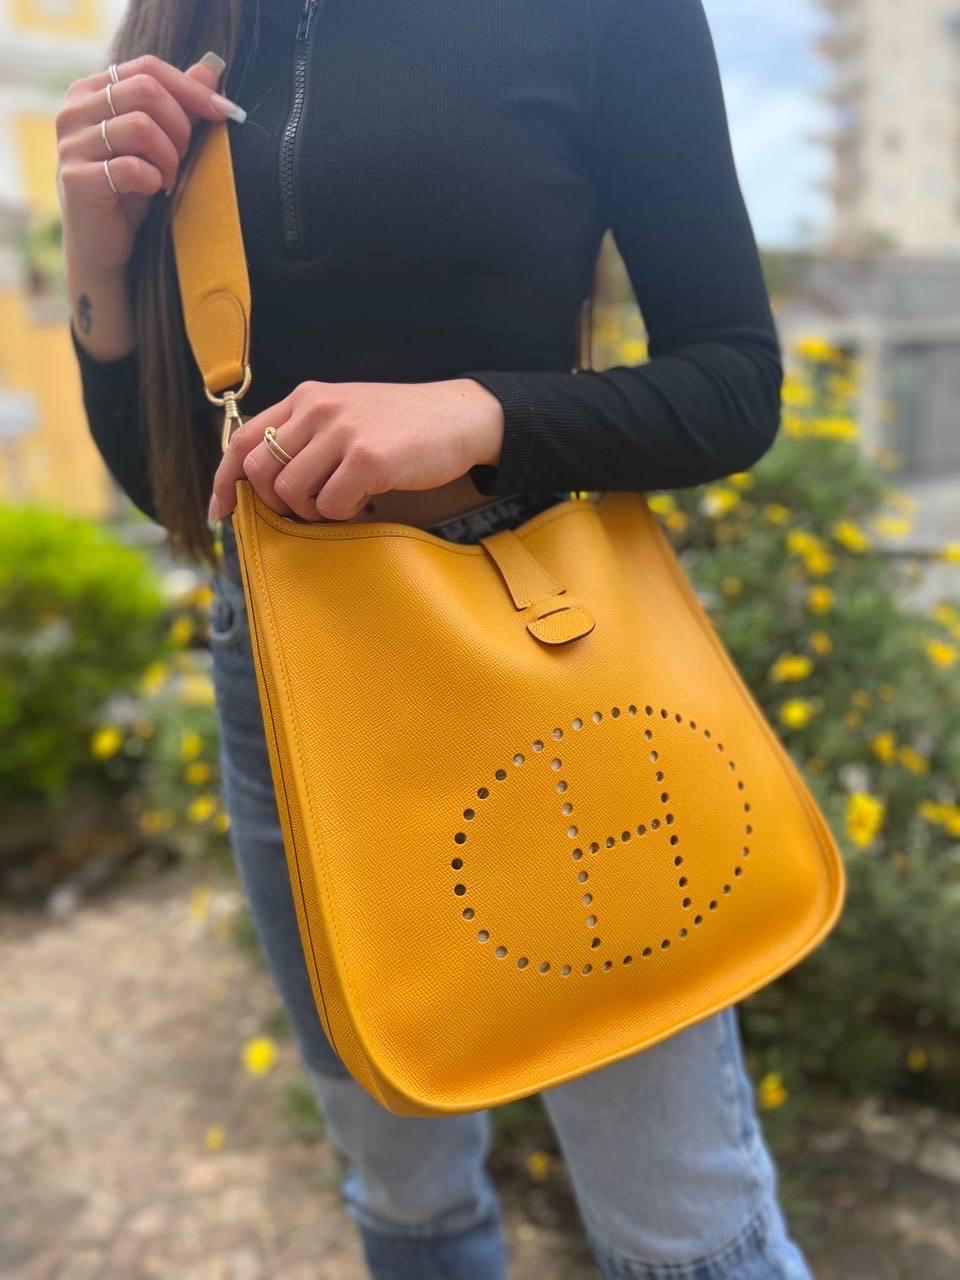 Bag signed Hermès, model Evelyne, size Gm, made in Epsom leather, stiff and structured with motif printed in the leather, in the Jaune colorway with golden hardware. Equipped with a closure with a central button band, internally lined in yellow